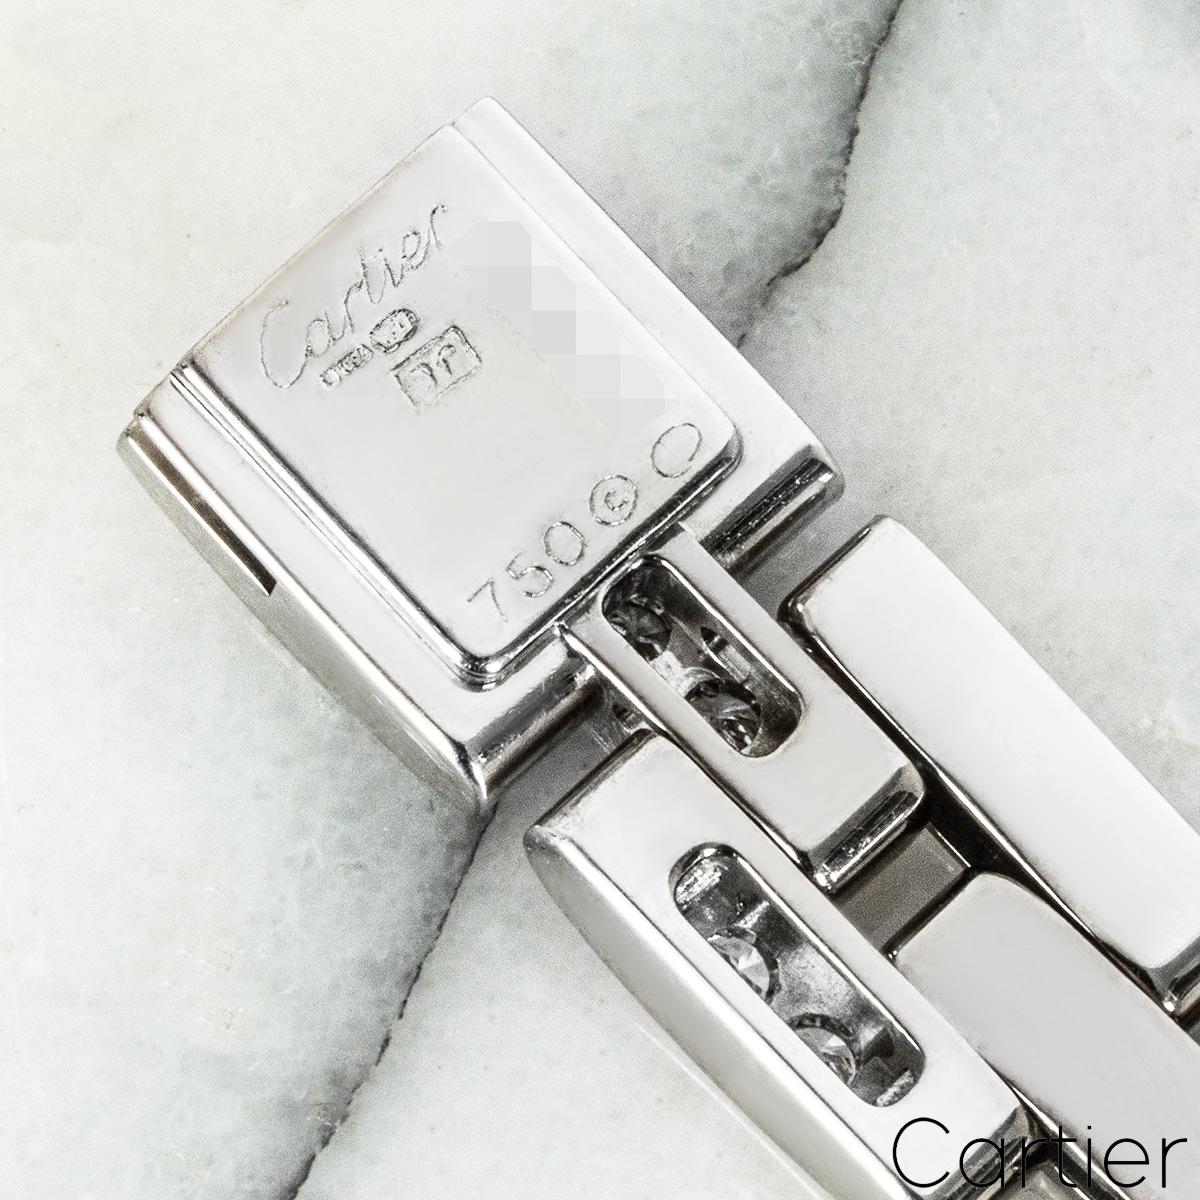 Cartier White Gold Diamond Maillon Panthere Bracelet N6025200 For Sale 2